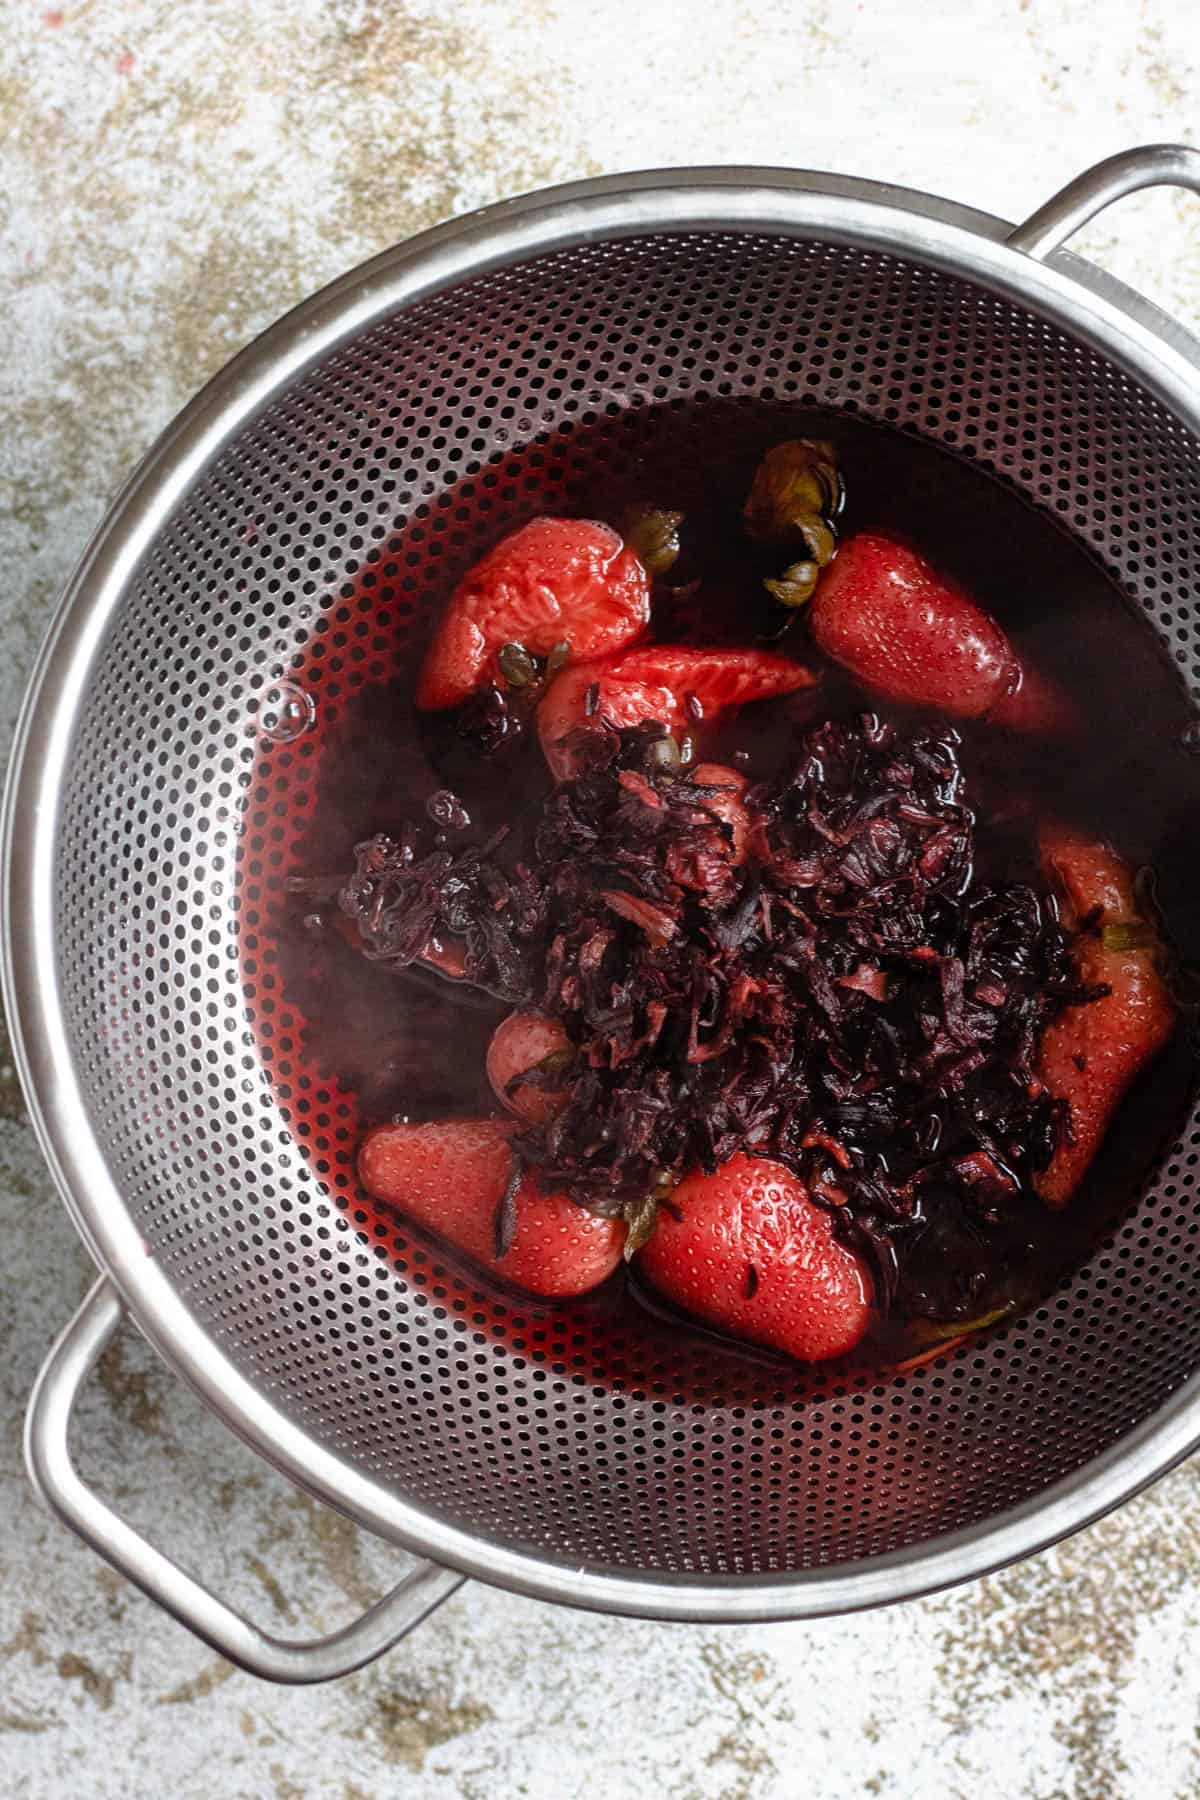 Dried hibiscus flowers and strawberries strained from tea that was brewed. 